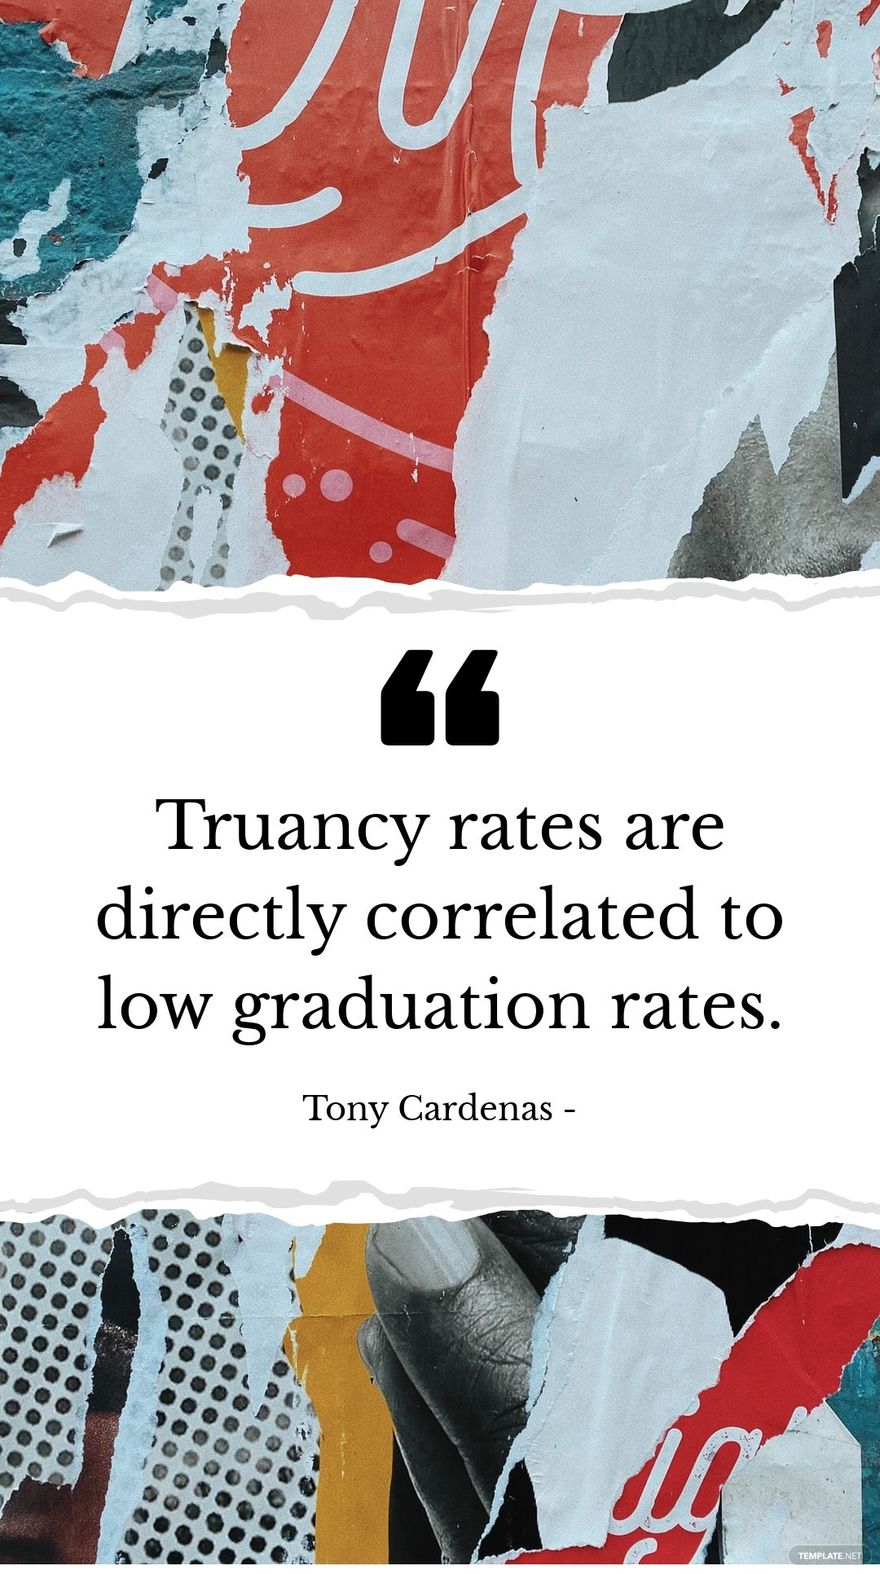 Free Tony Cardenas - Truancy rates are directly correlated to low graduation rates. in JPG